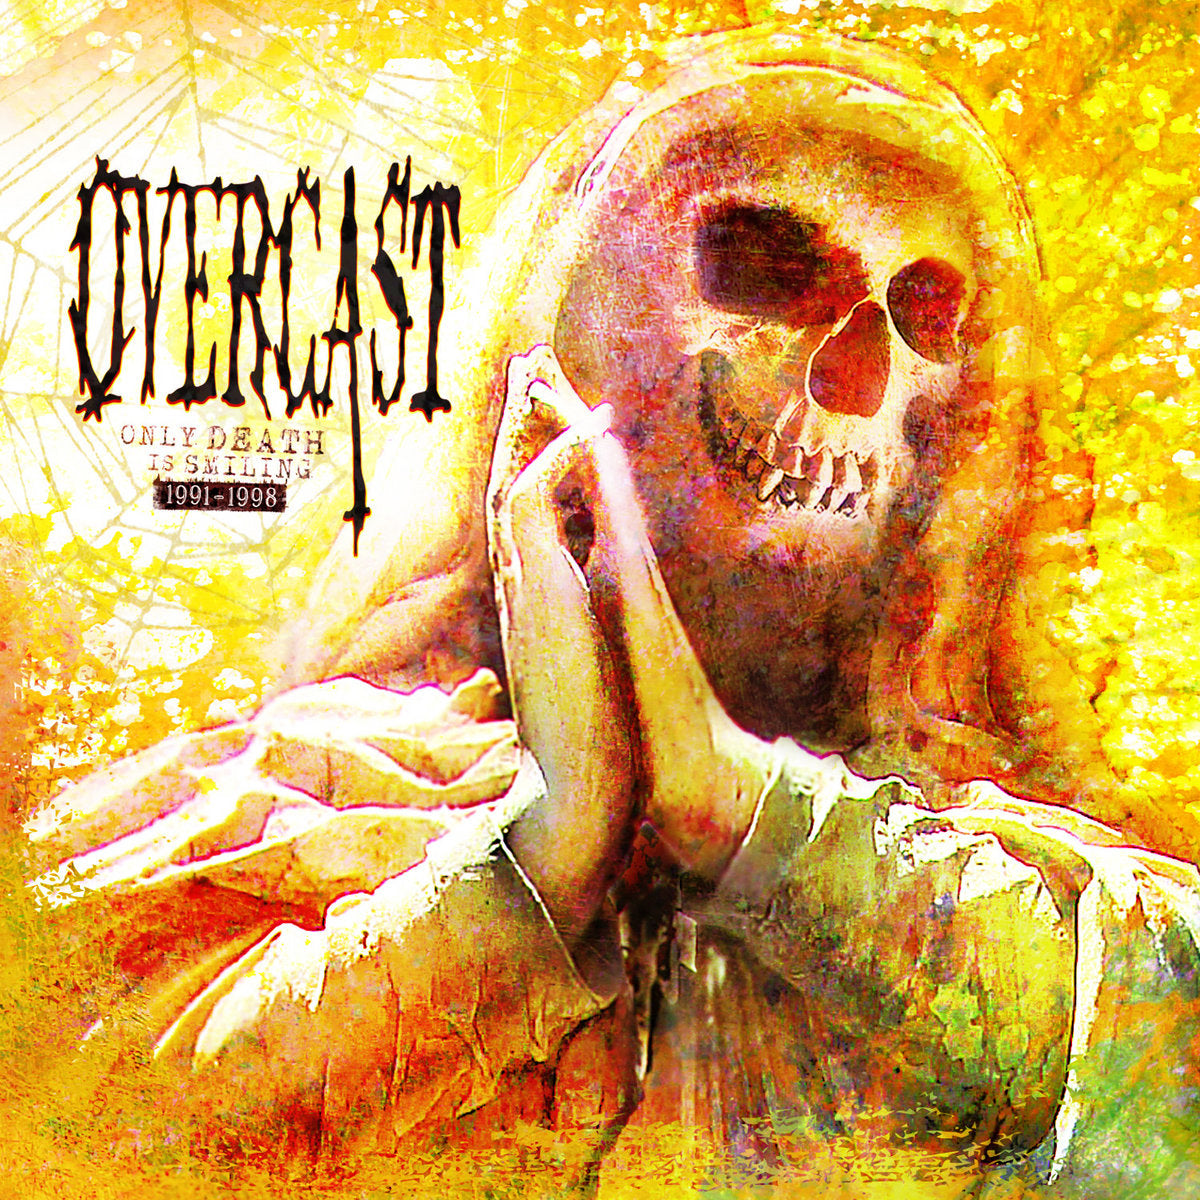 Overcast "Only Death Is Smiling 1991-1998" 3xCD